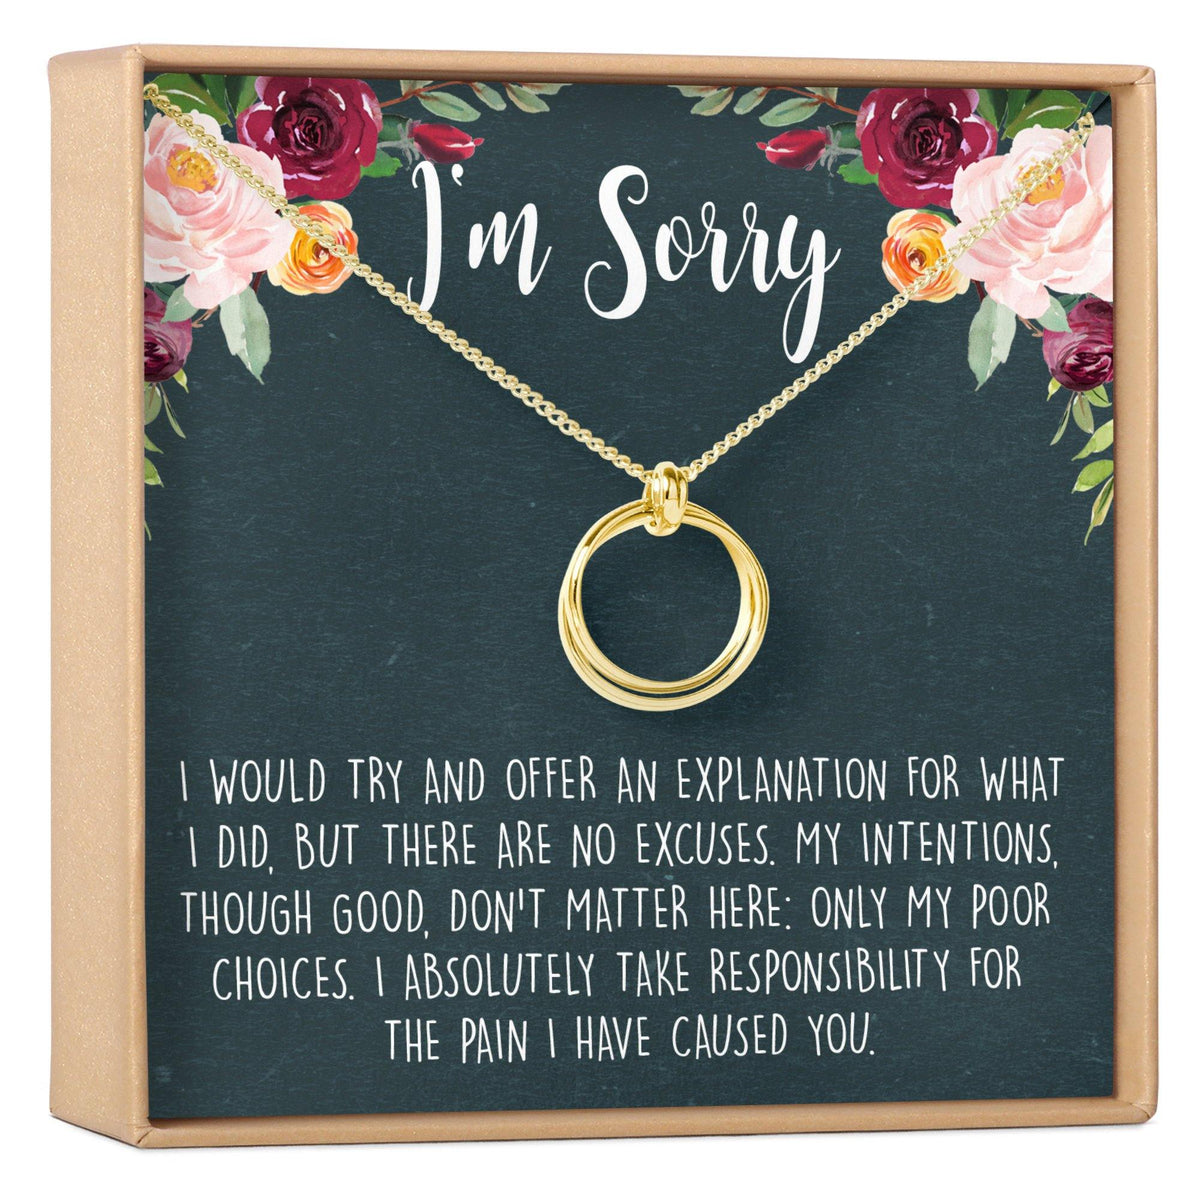 Apology Gifts | I Am Sorry Gifts | Get up to 60%